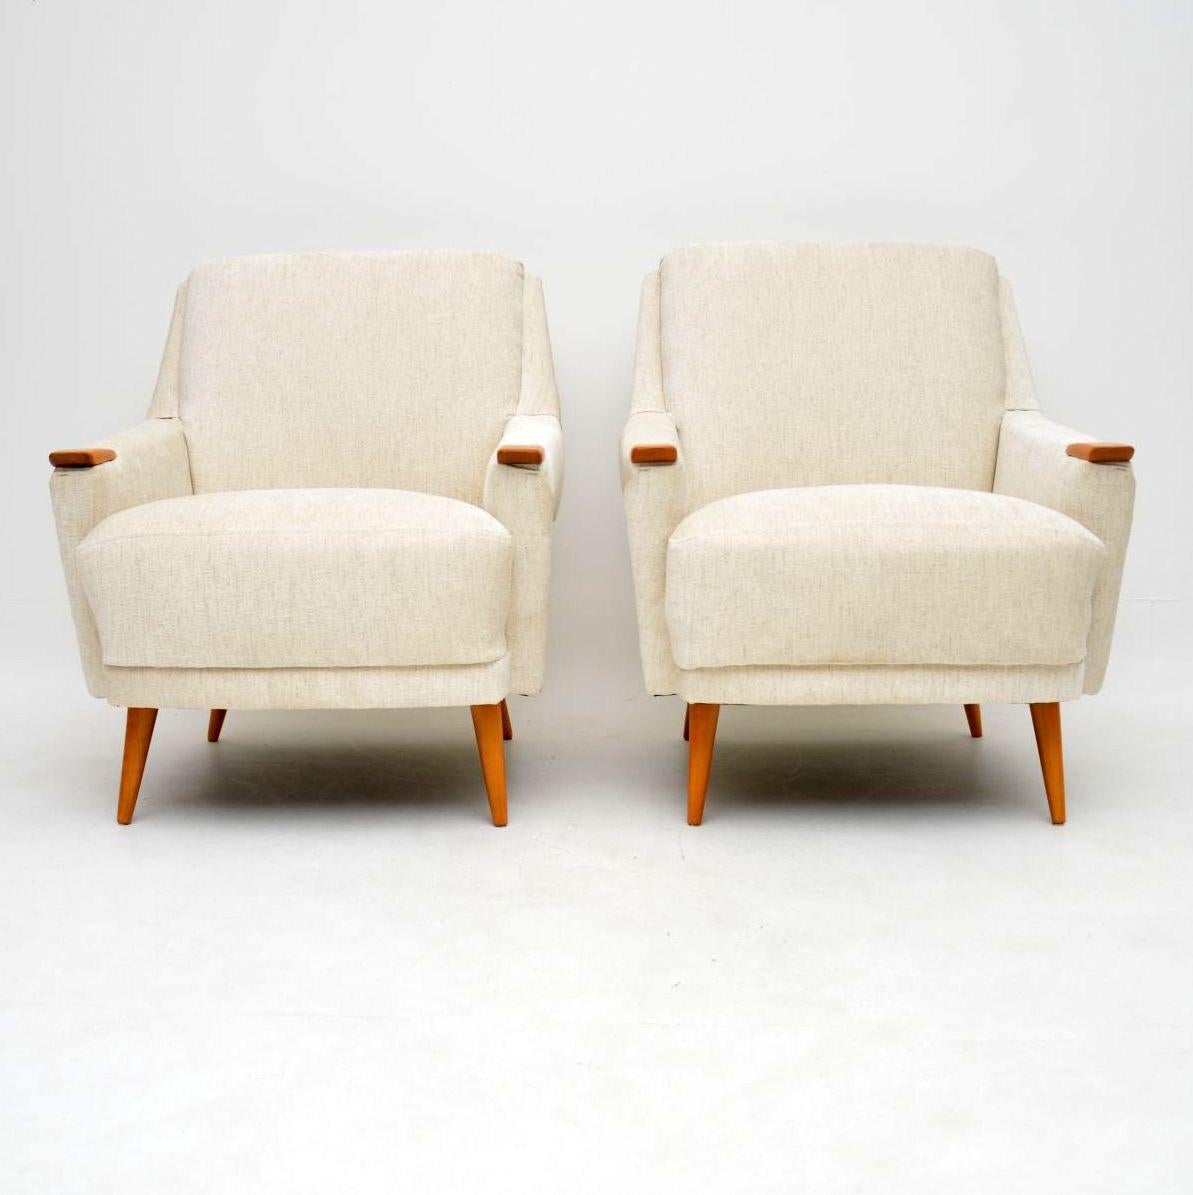 A spectacular pair of vintage Danish armchairs, these date from the 1950s-1960s. They are of amazing quality, are very comfortable and in absolutely superb condition. We have had the arms and legs stripped and re-polished to a very high standard,